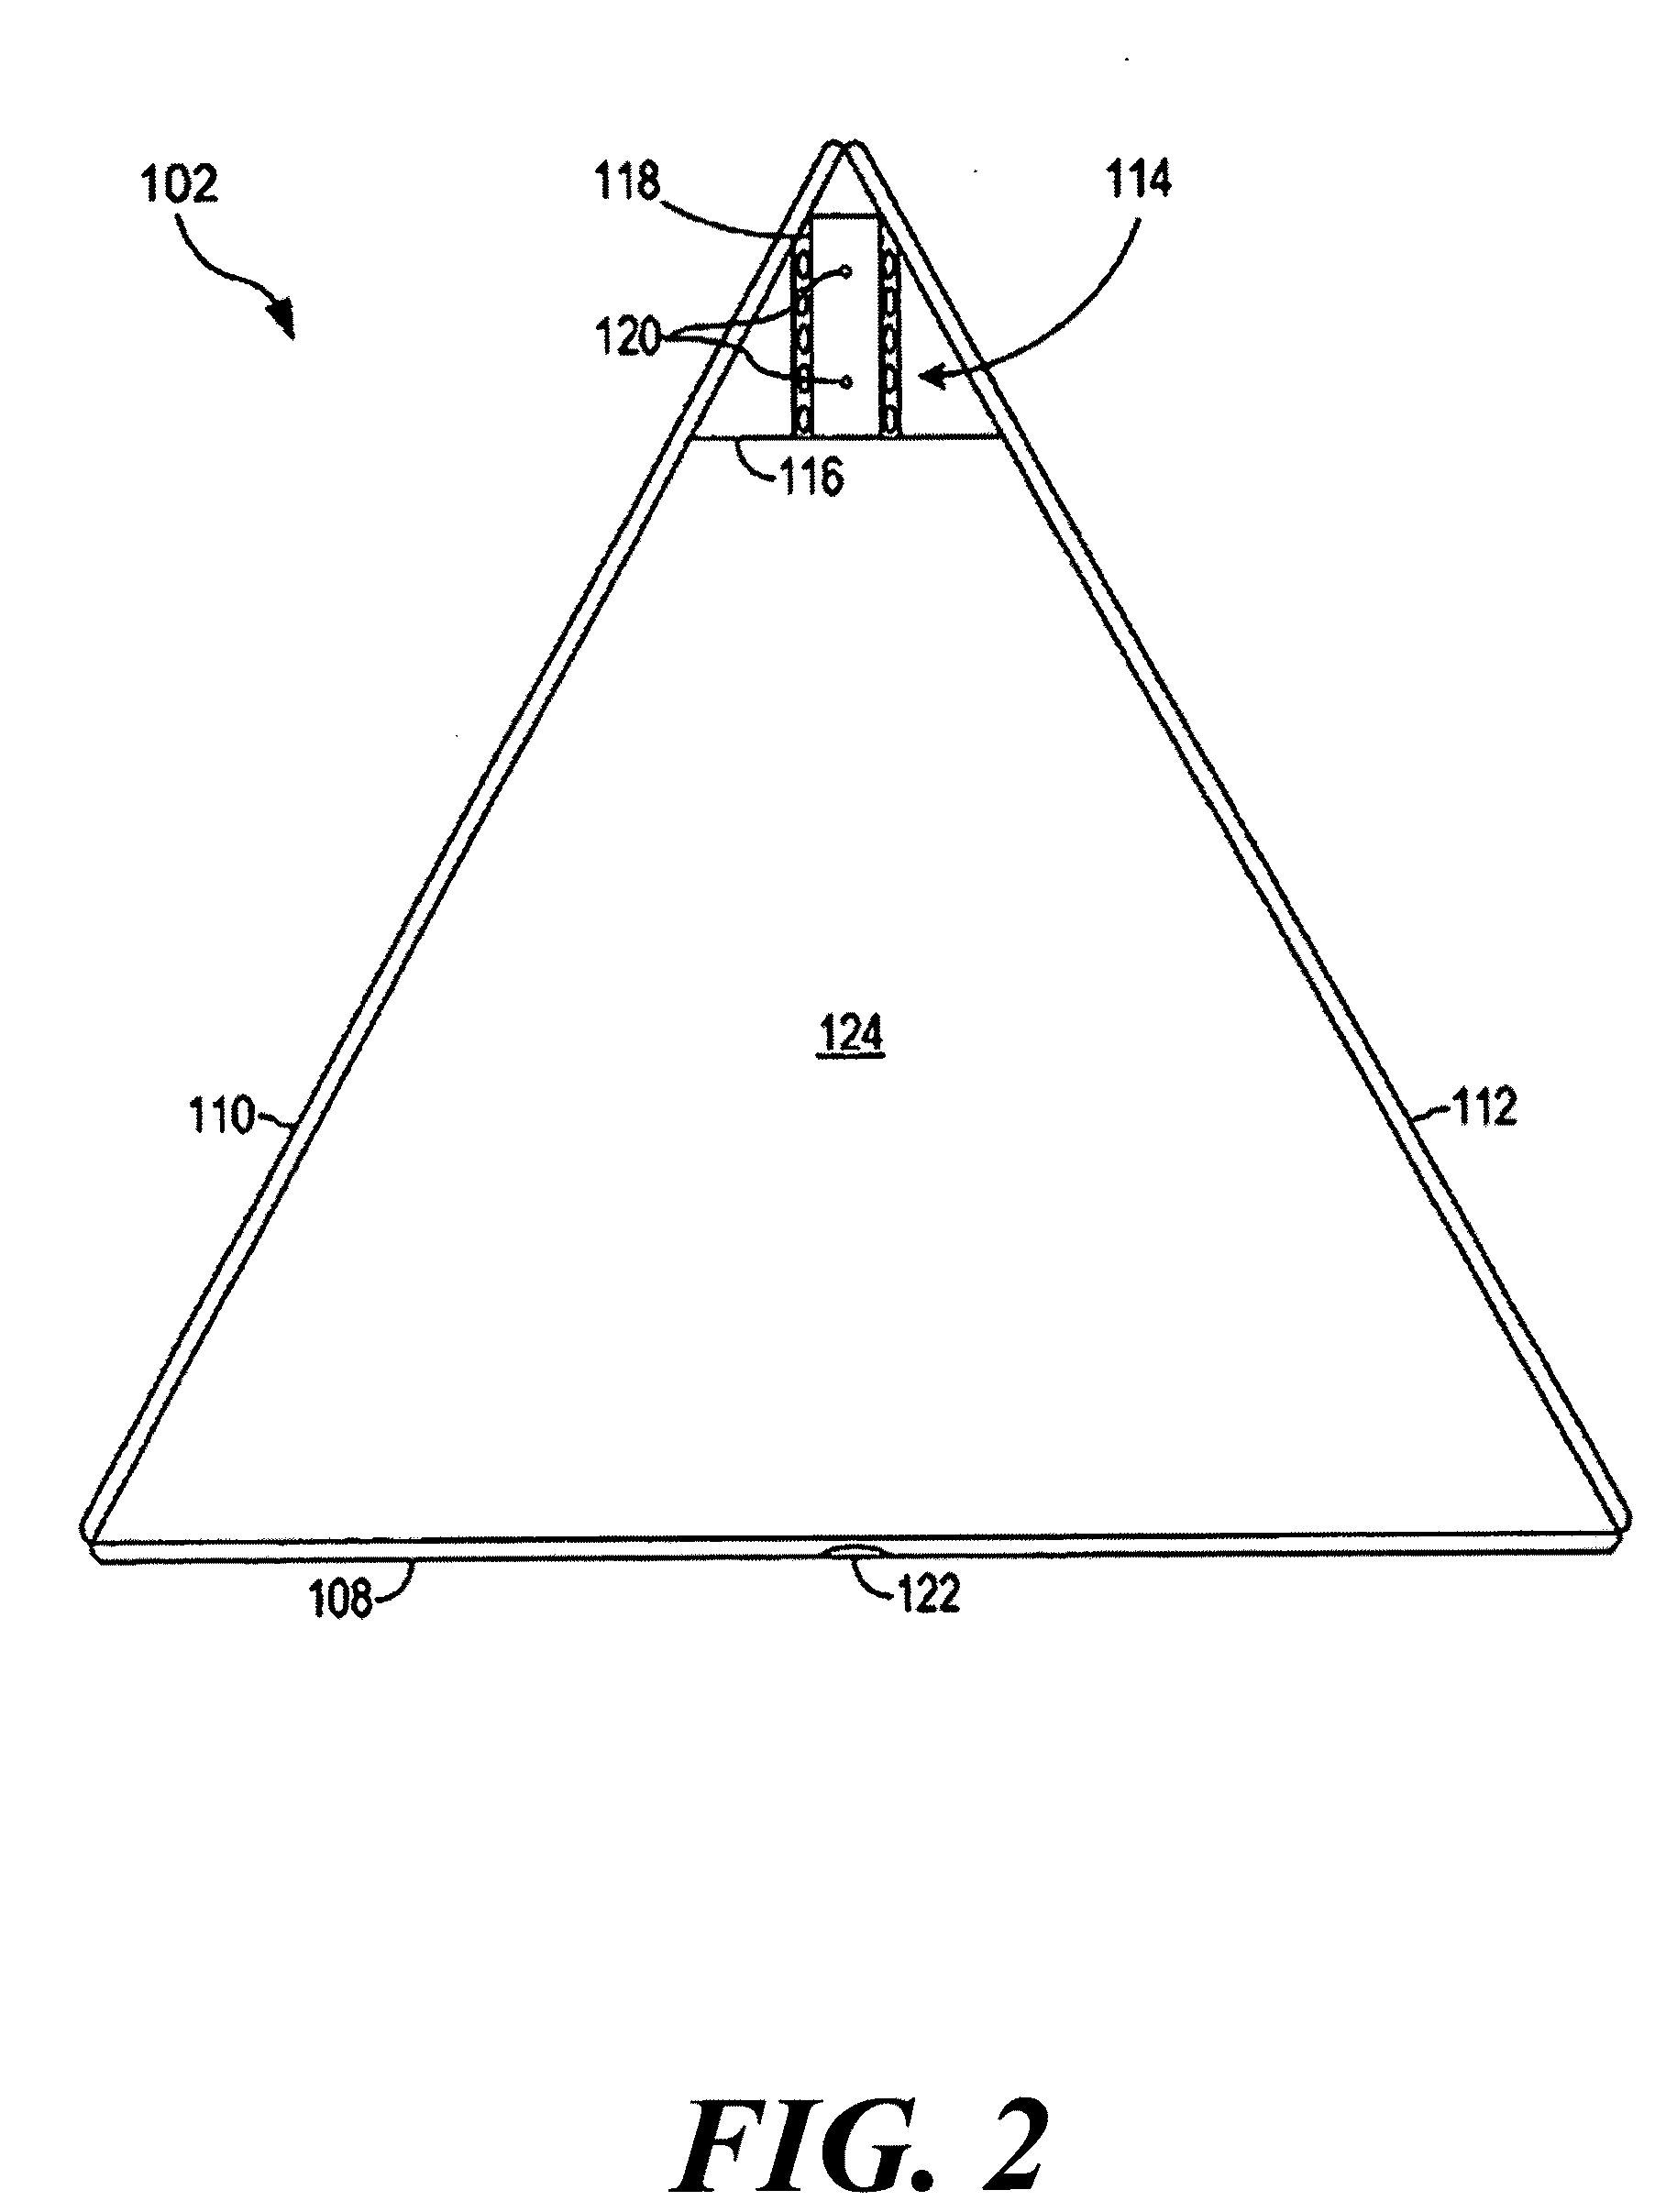 Apparatus for collecting and handling yard debris utilizing a reusable receptable